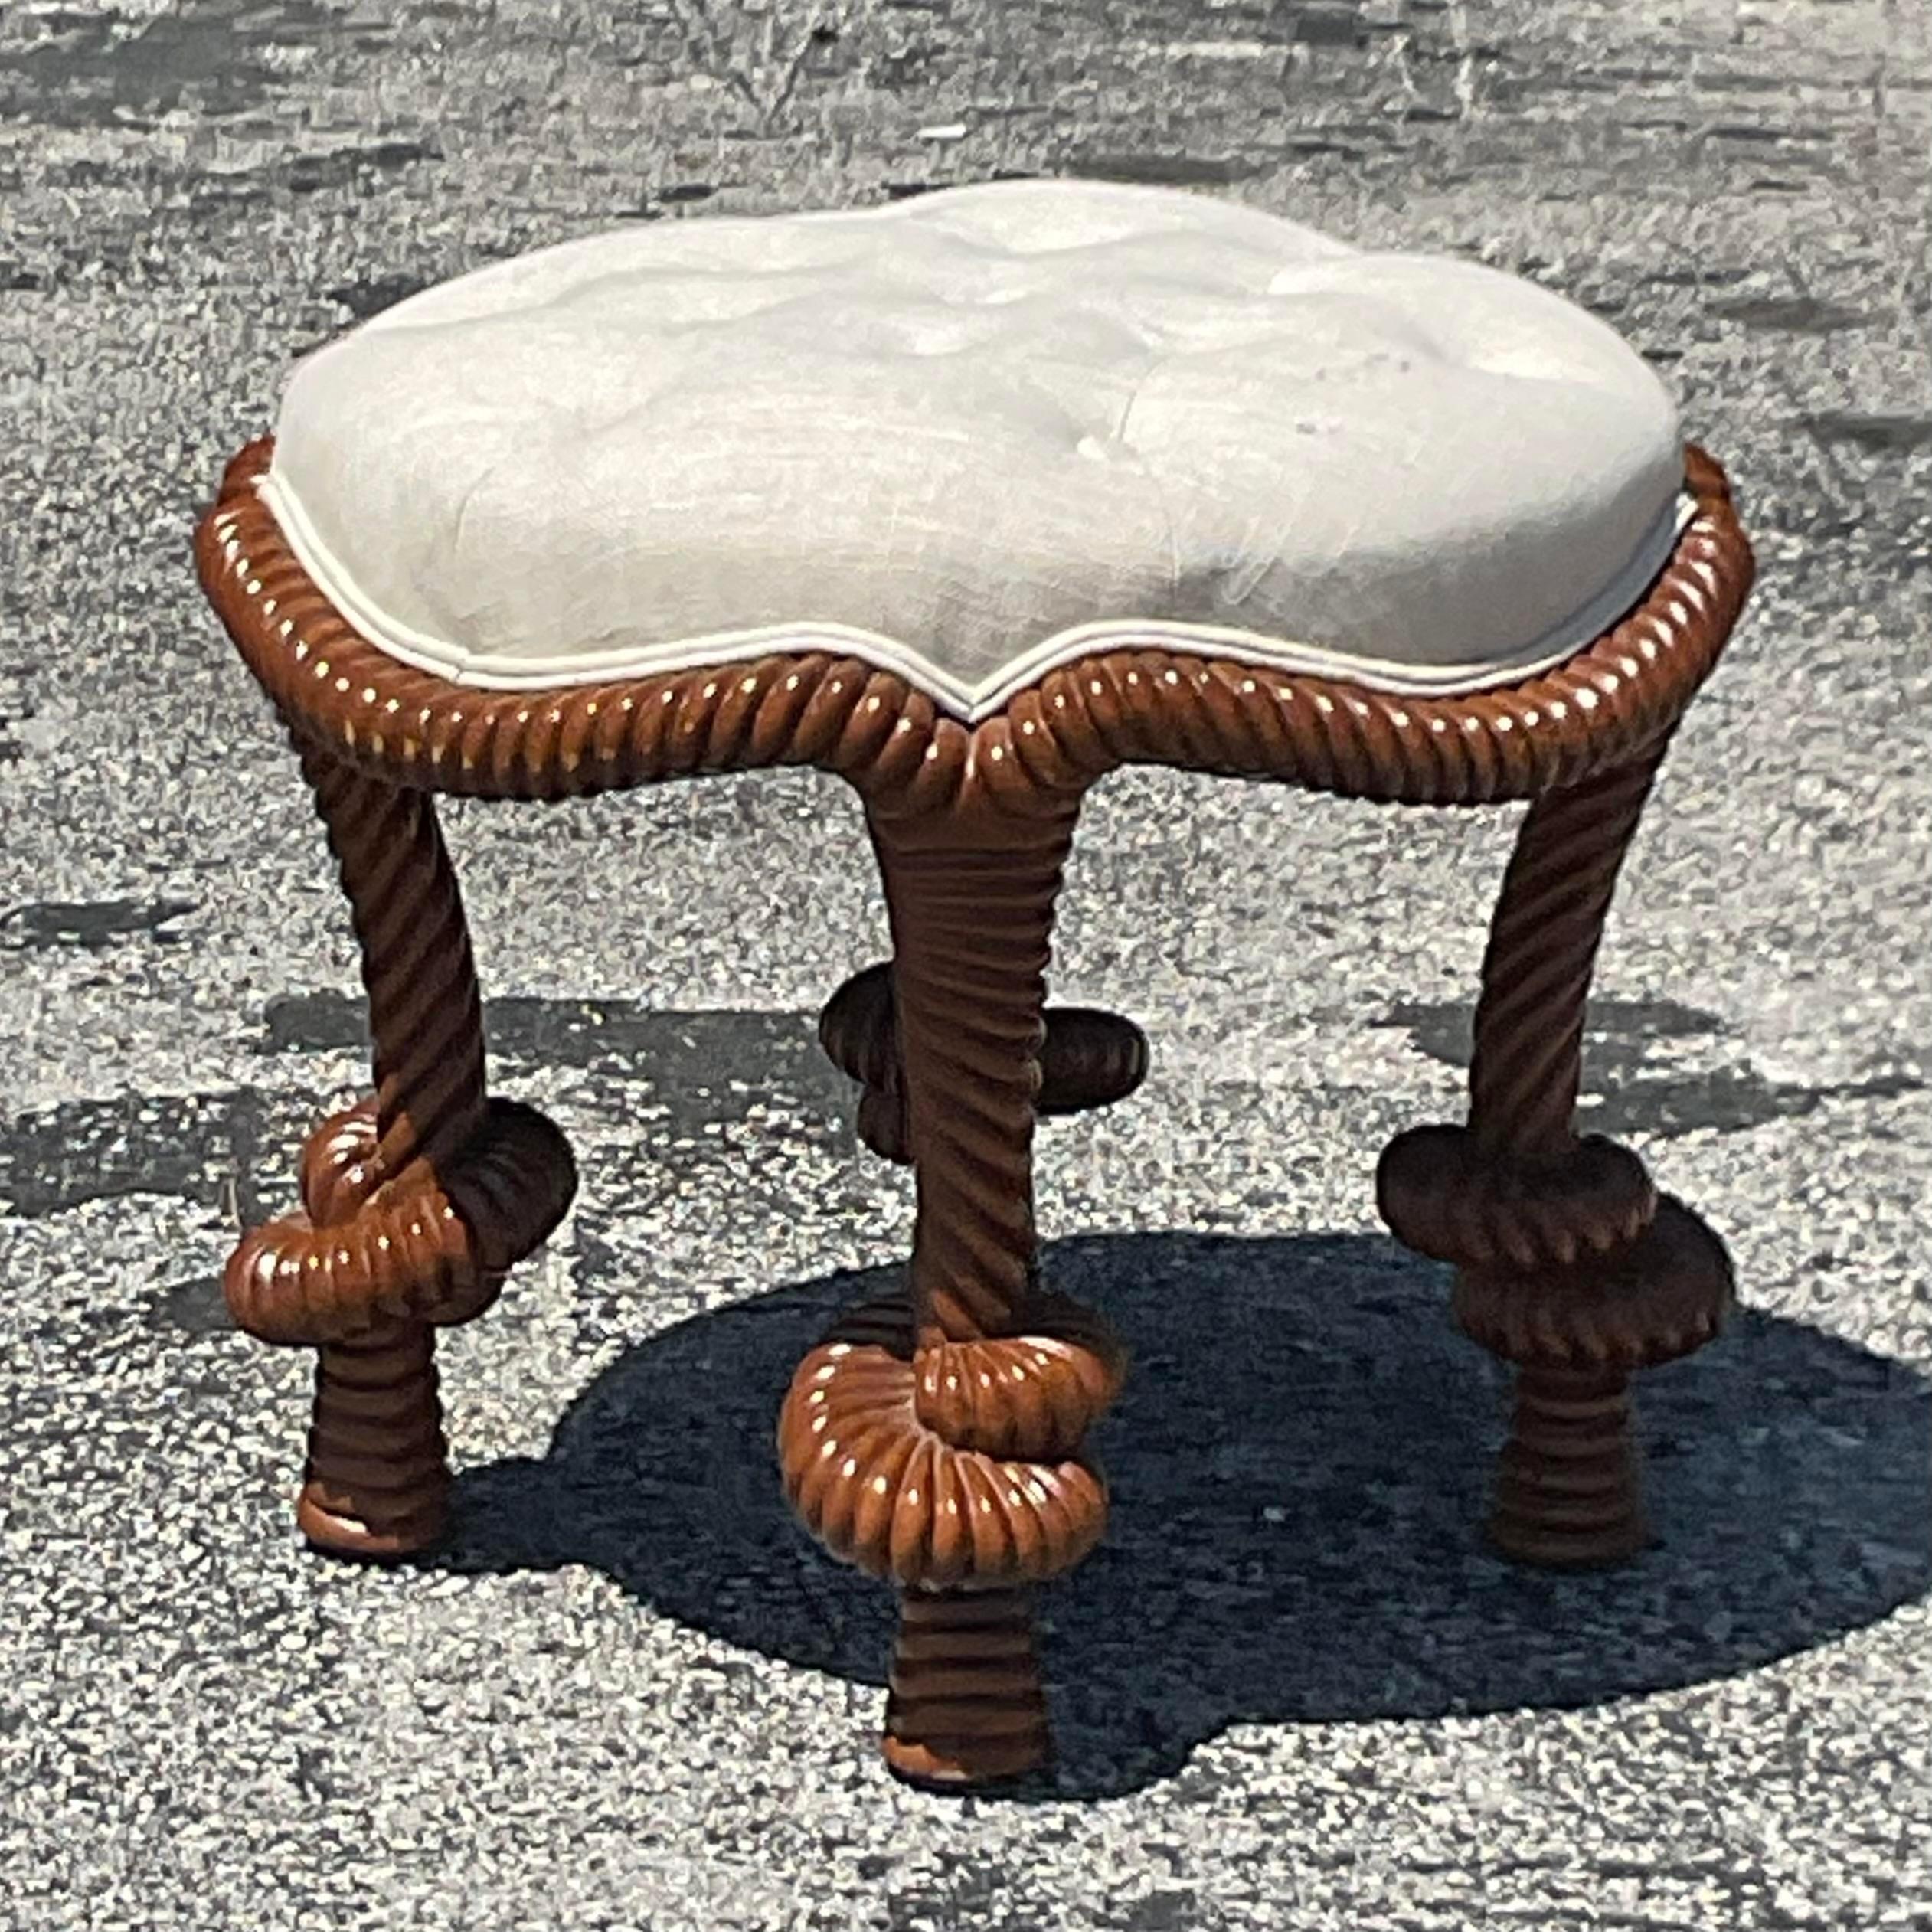 Upholstery Vintage Regency Carved Knot Tufted Low Stool